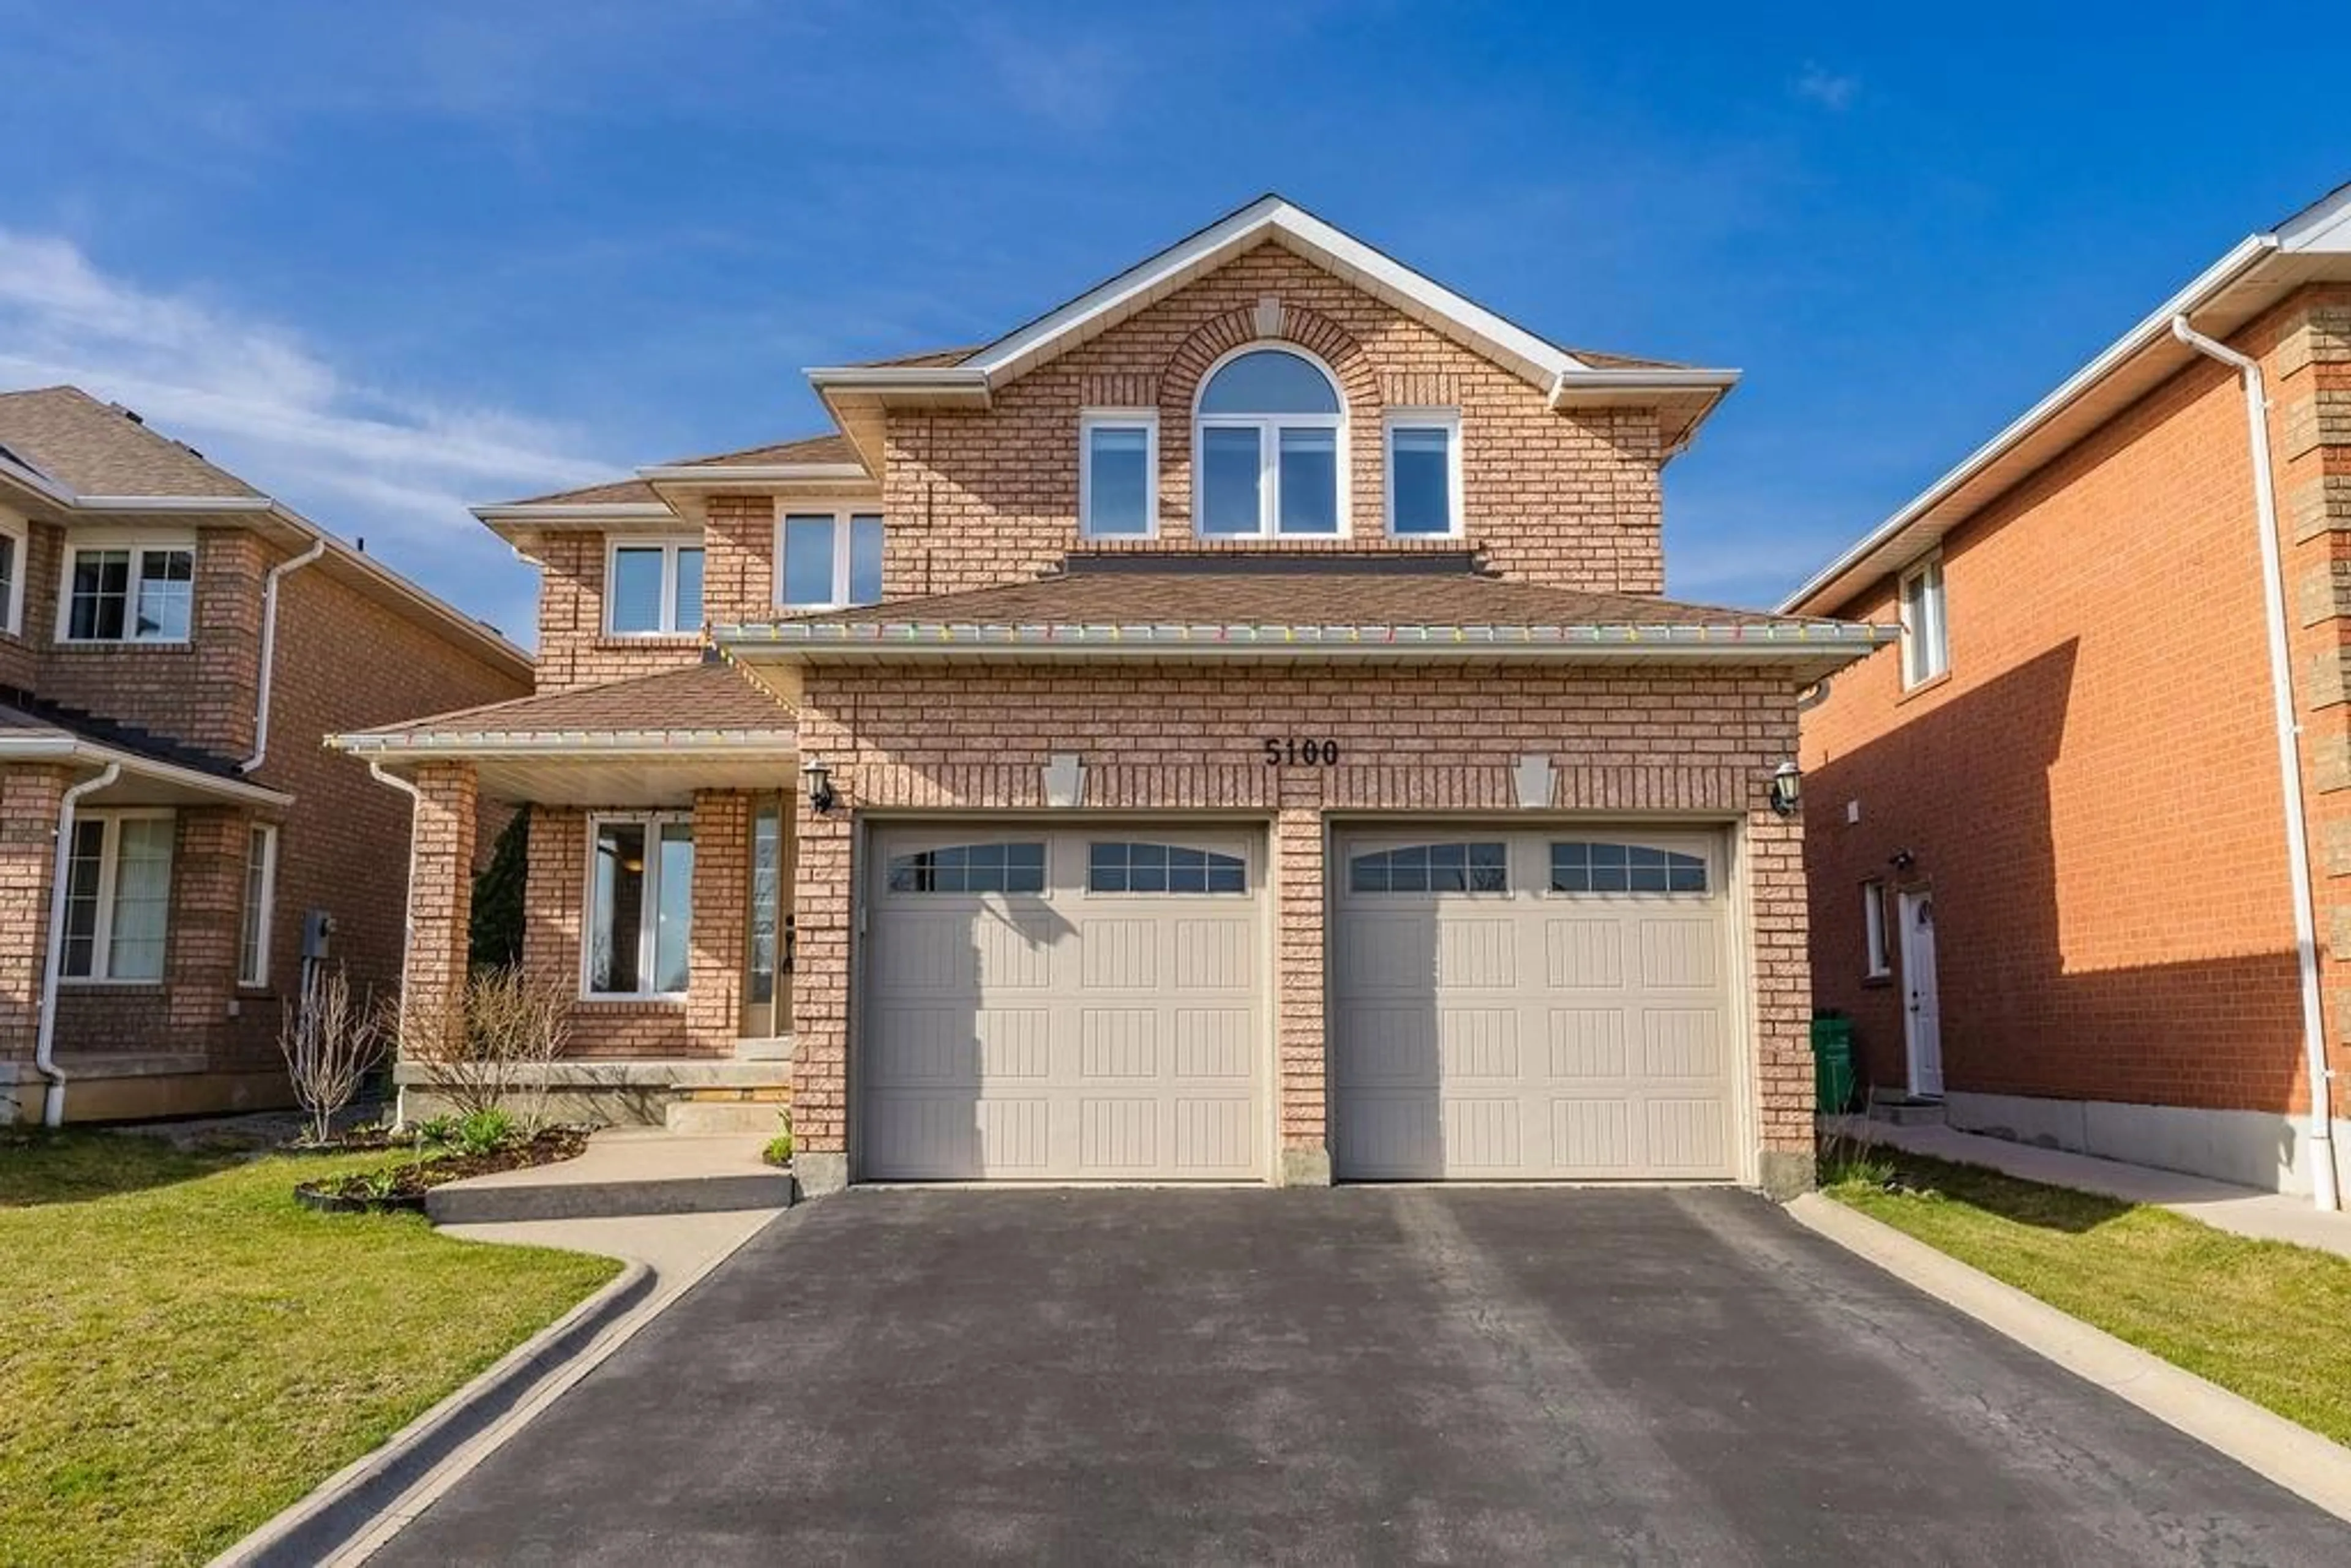 Home with brick exterior material for 5100 FALLINGBROOK Dr, Mississauga Ontario L5V 1S7